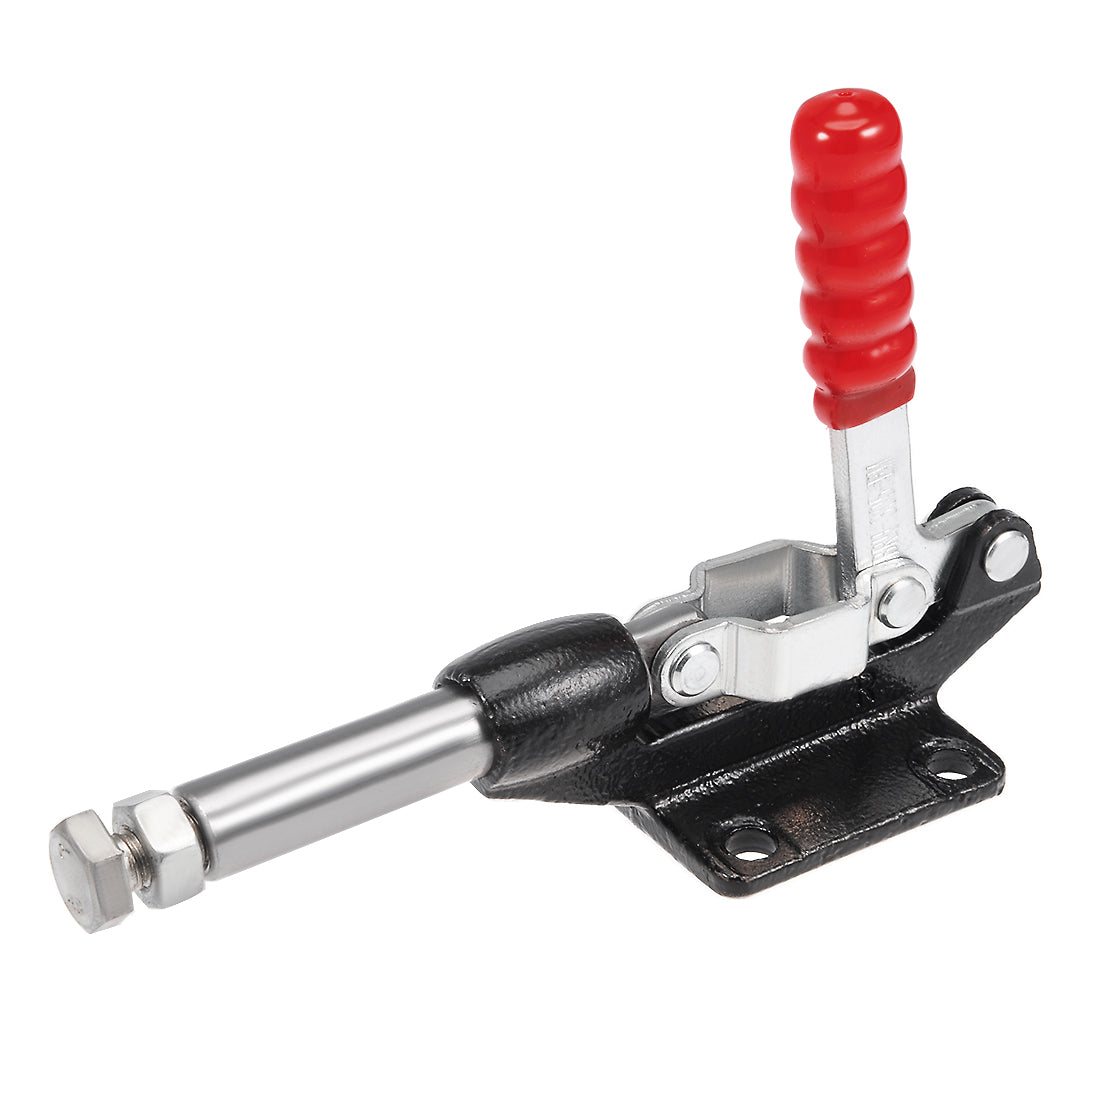 uxcell Uxcell Toggle Clamp 390kg 858lbs Holding Capacity 44mm Stroke Push Pull Action Hand Tool BRH-305-EM